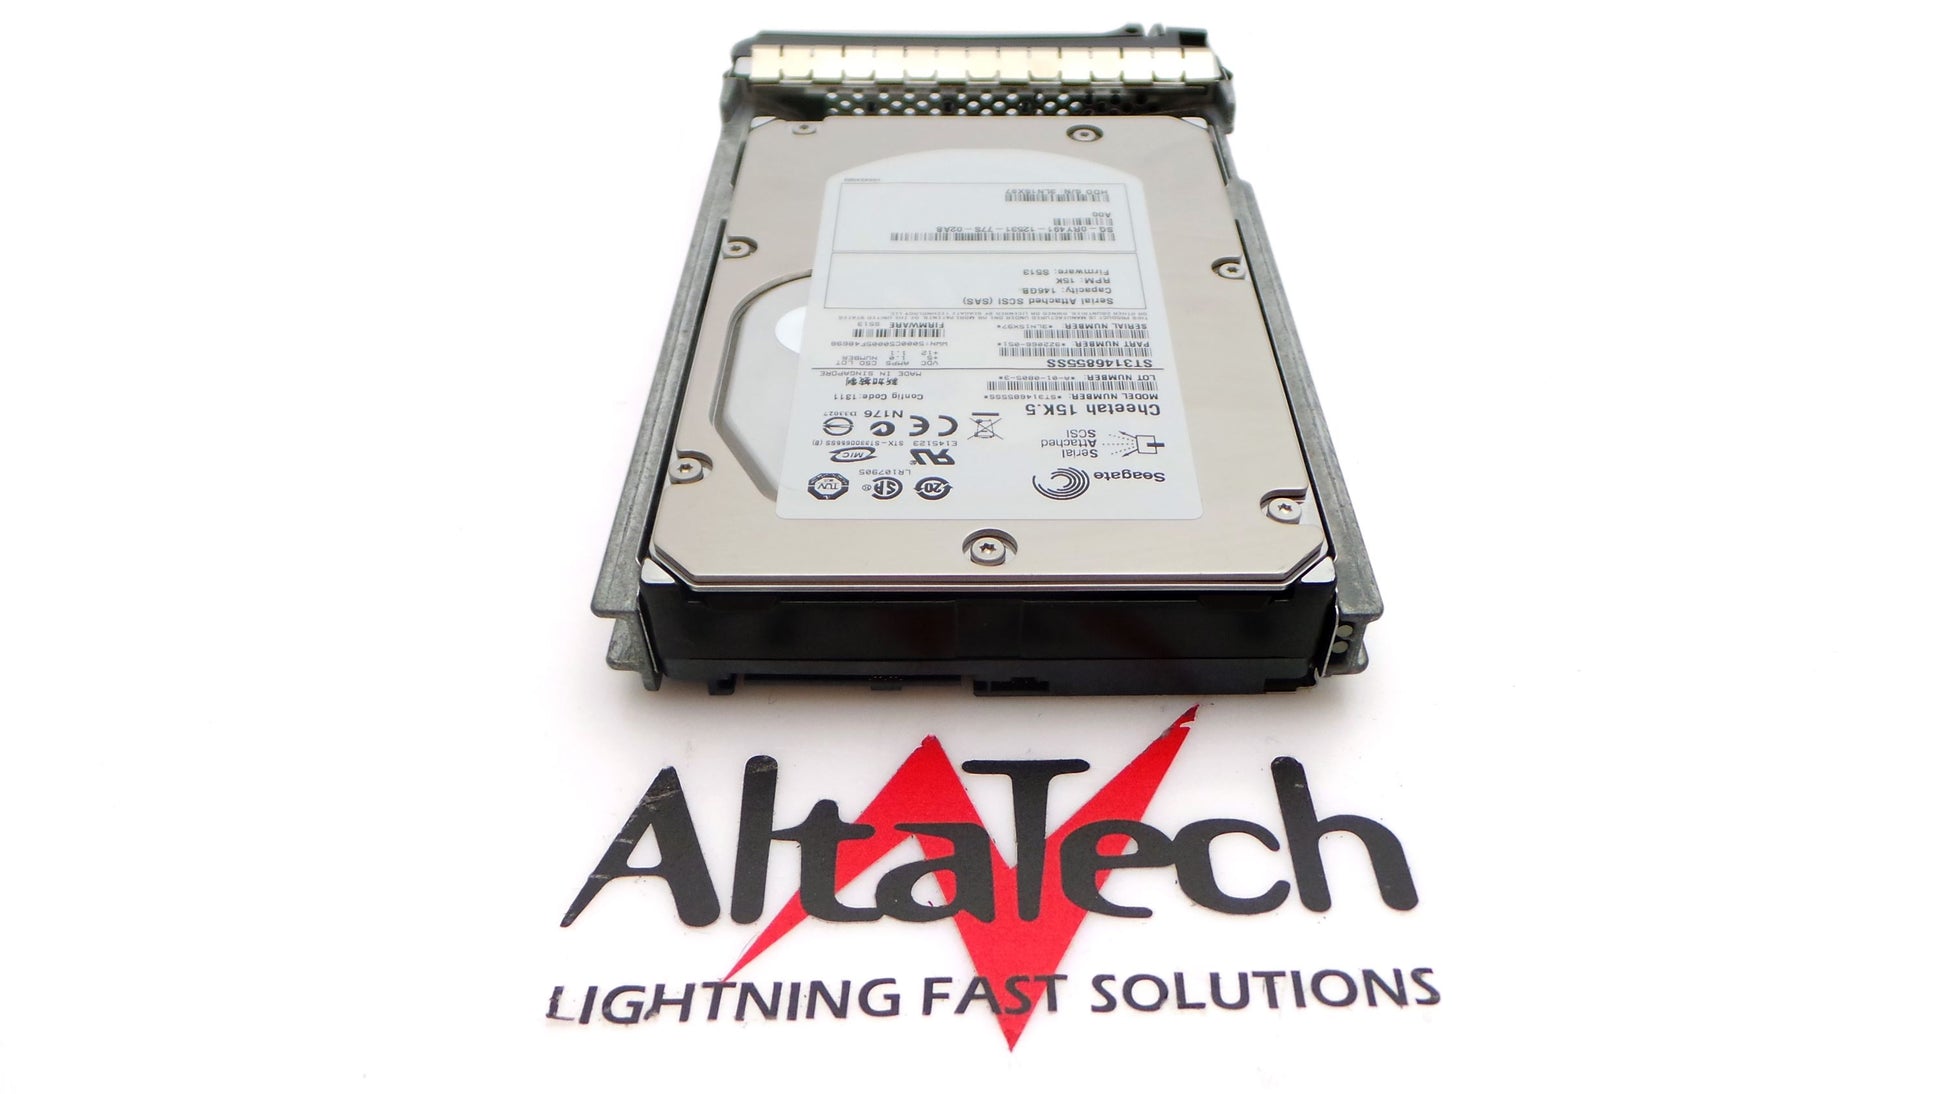 Seagate ST3146855SS 146GB 15K SAS 3.5 3G HDD, Used